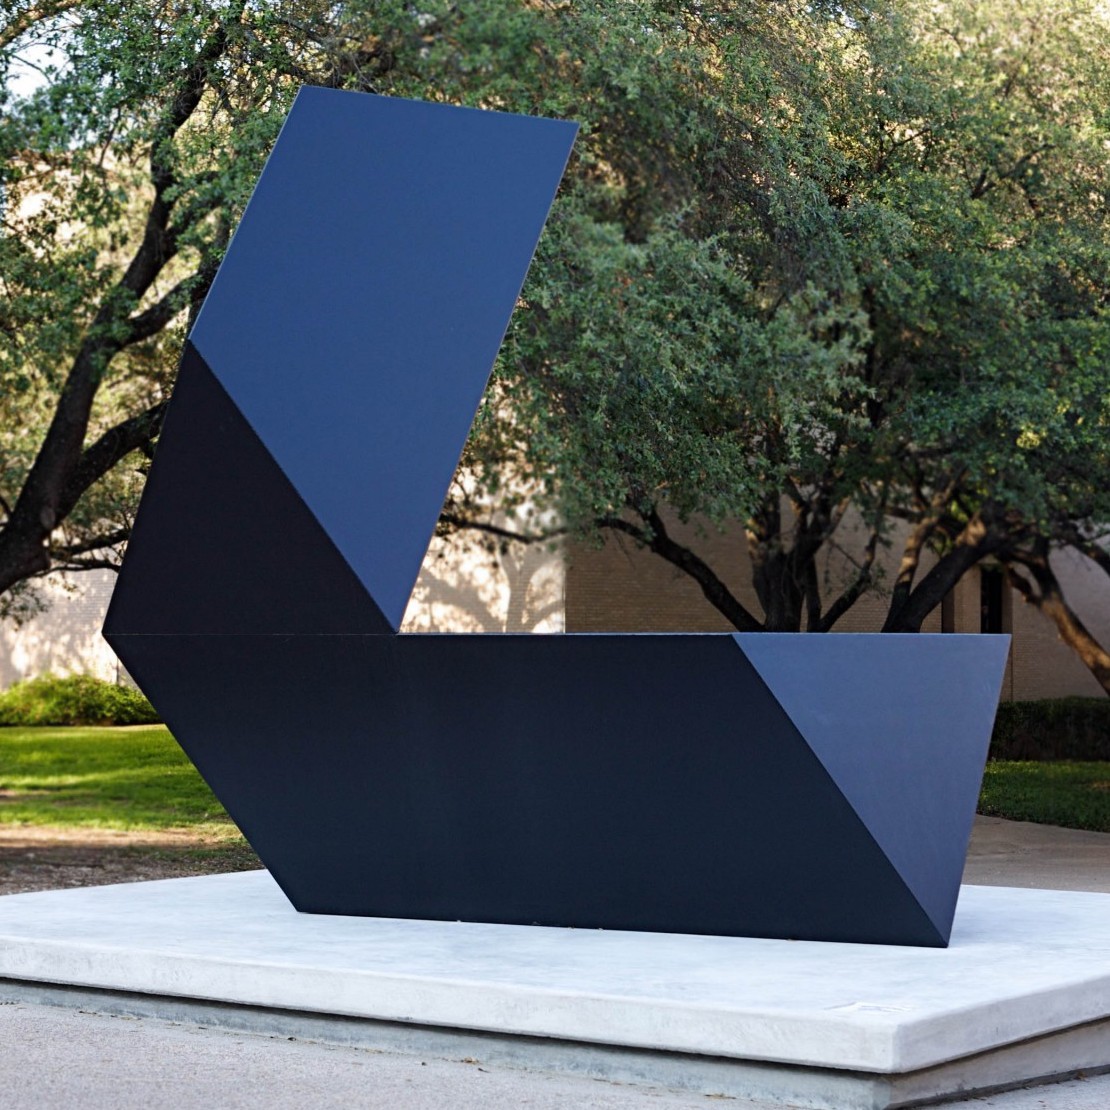 A deep black sculpture composed of elongated, triangular sections. In this view the sculpture forms an "L" shape